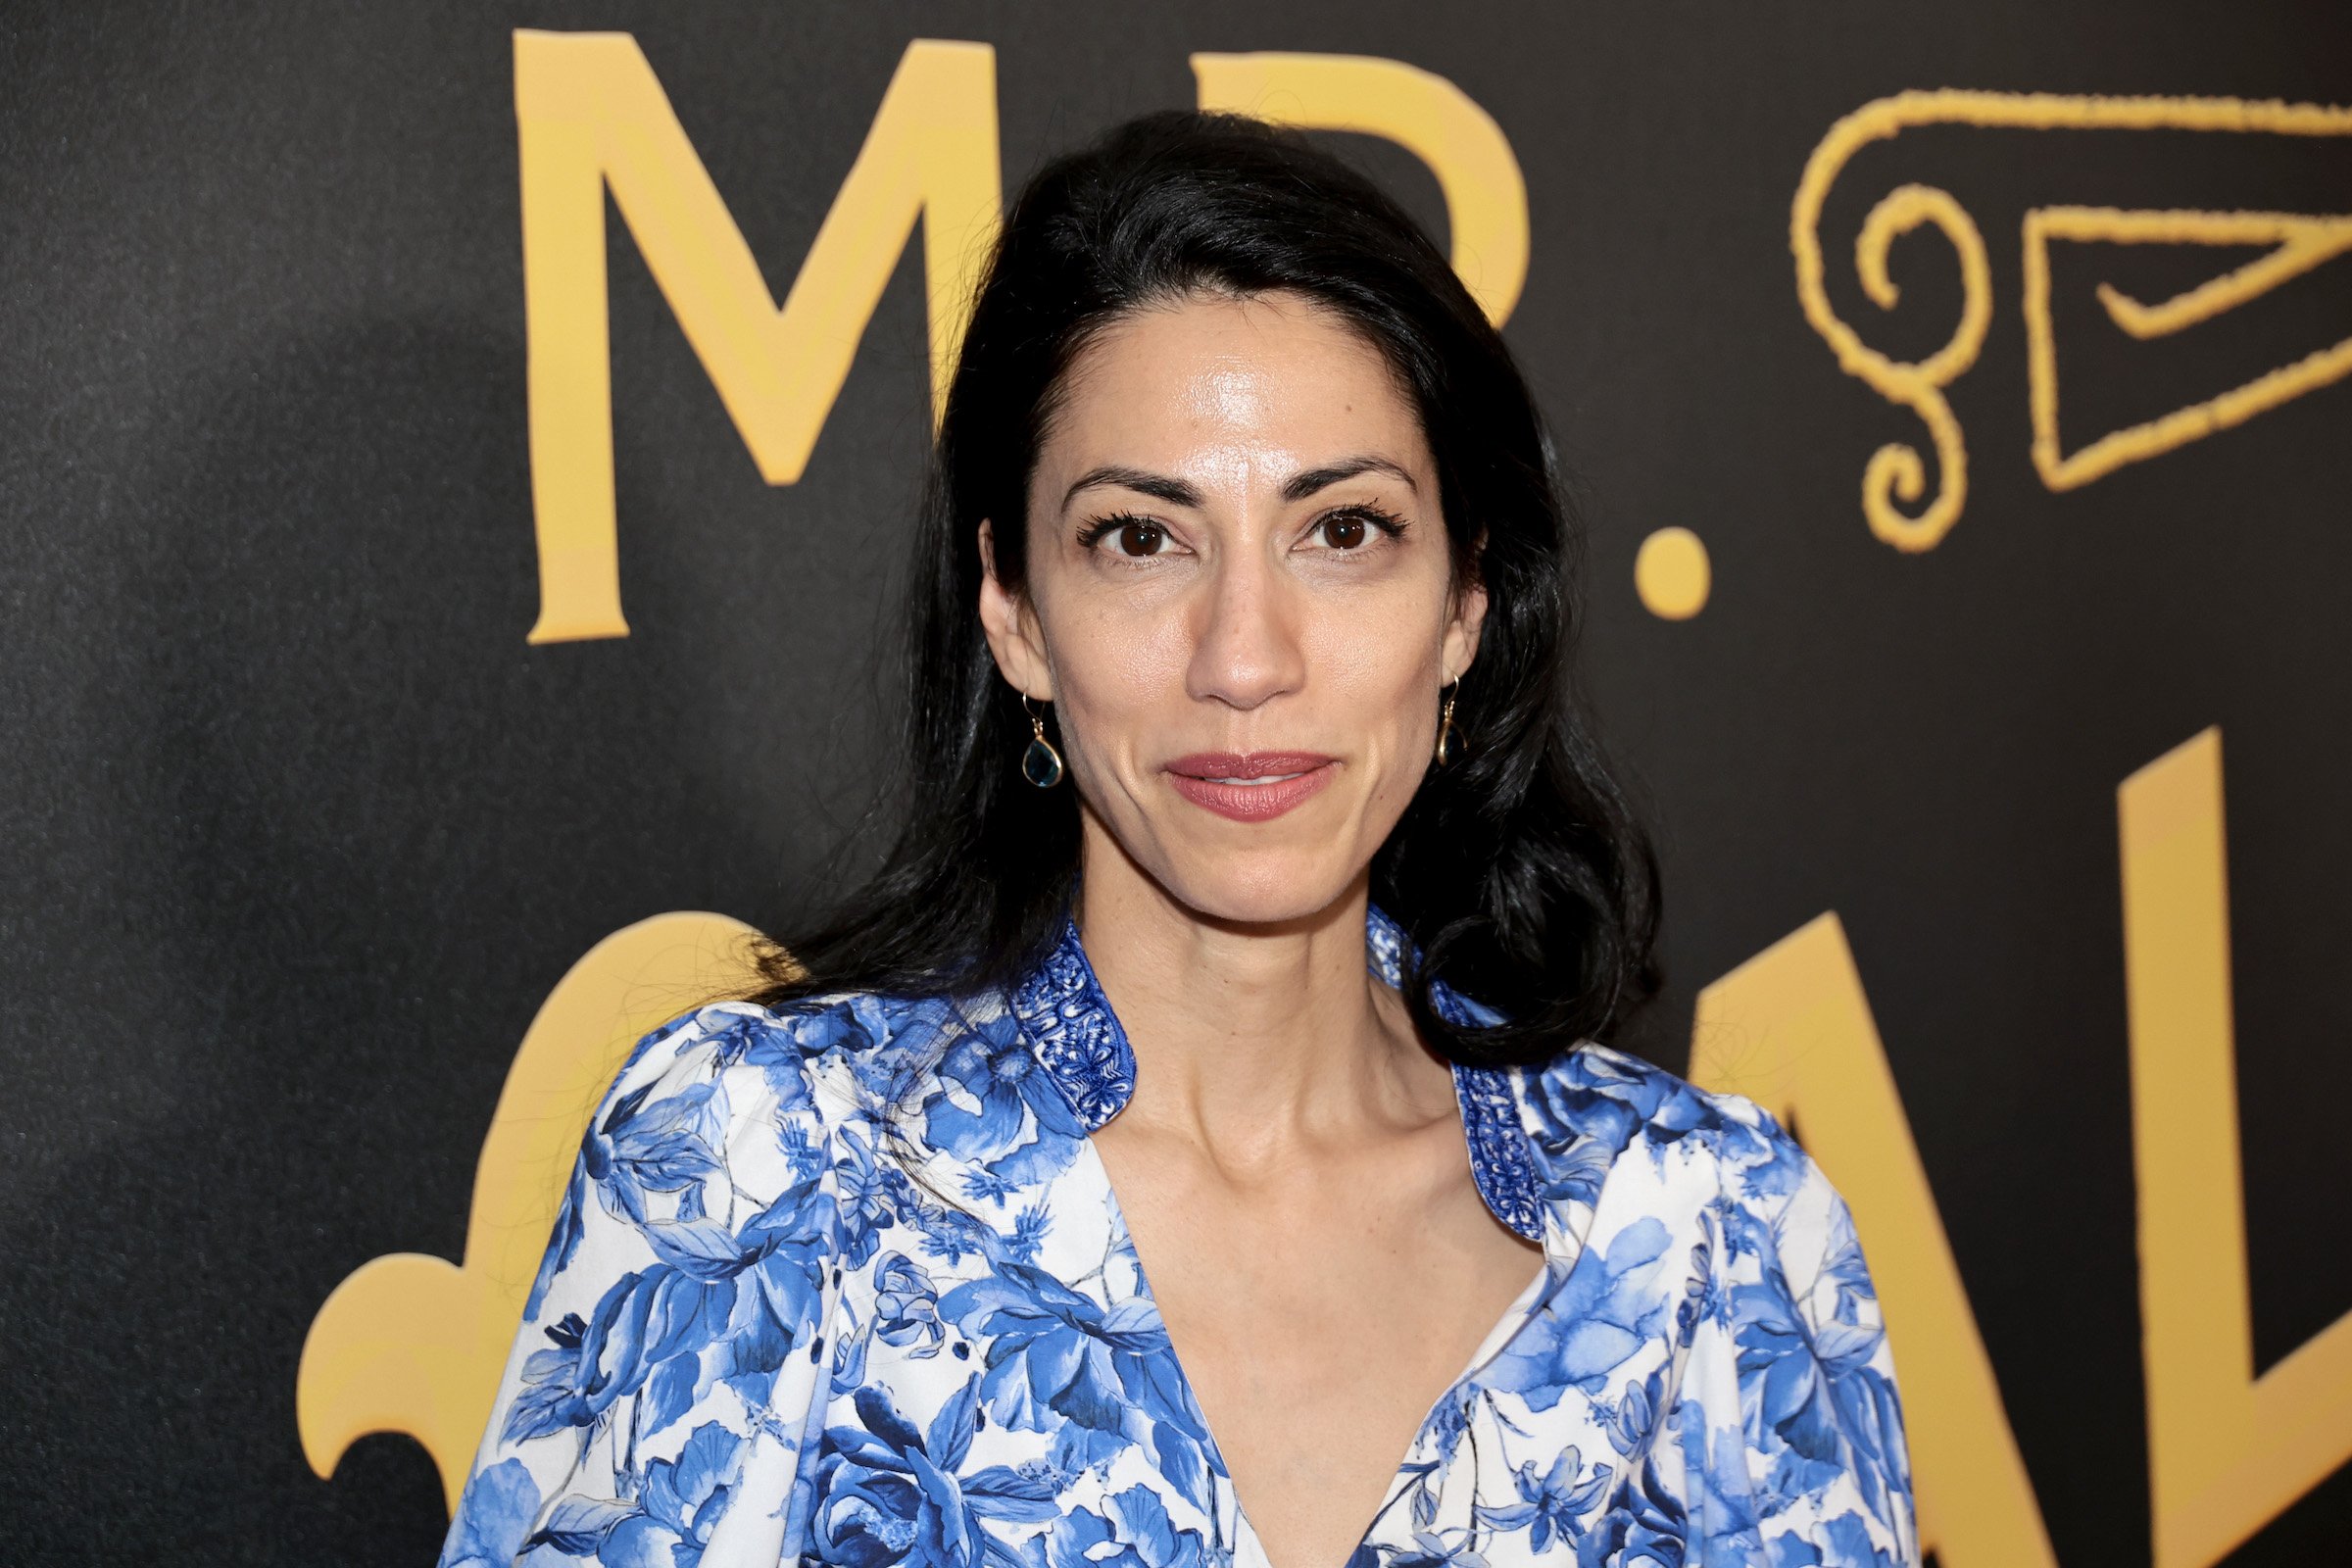 Huma Abedin, who is reportedly dating Bradley Cooper